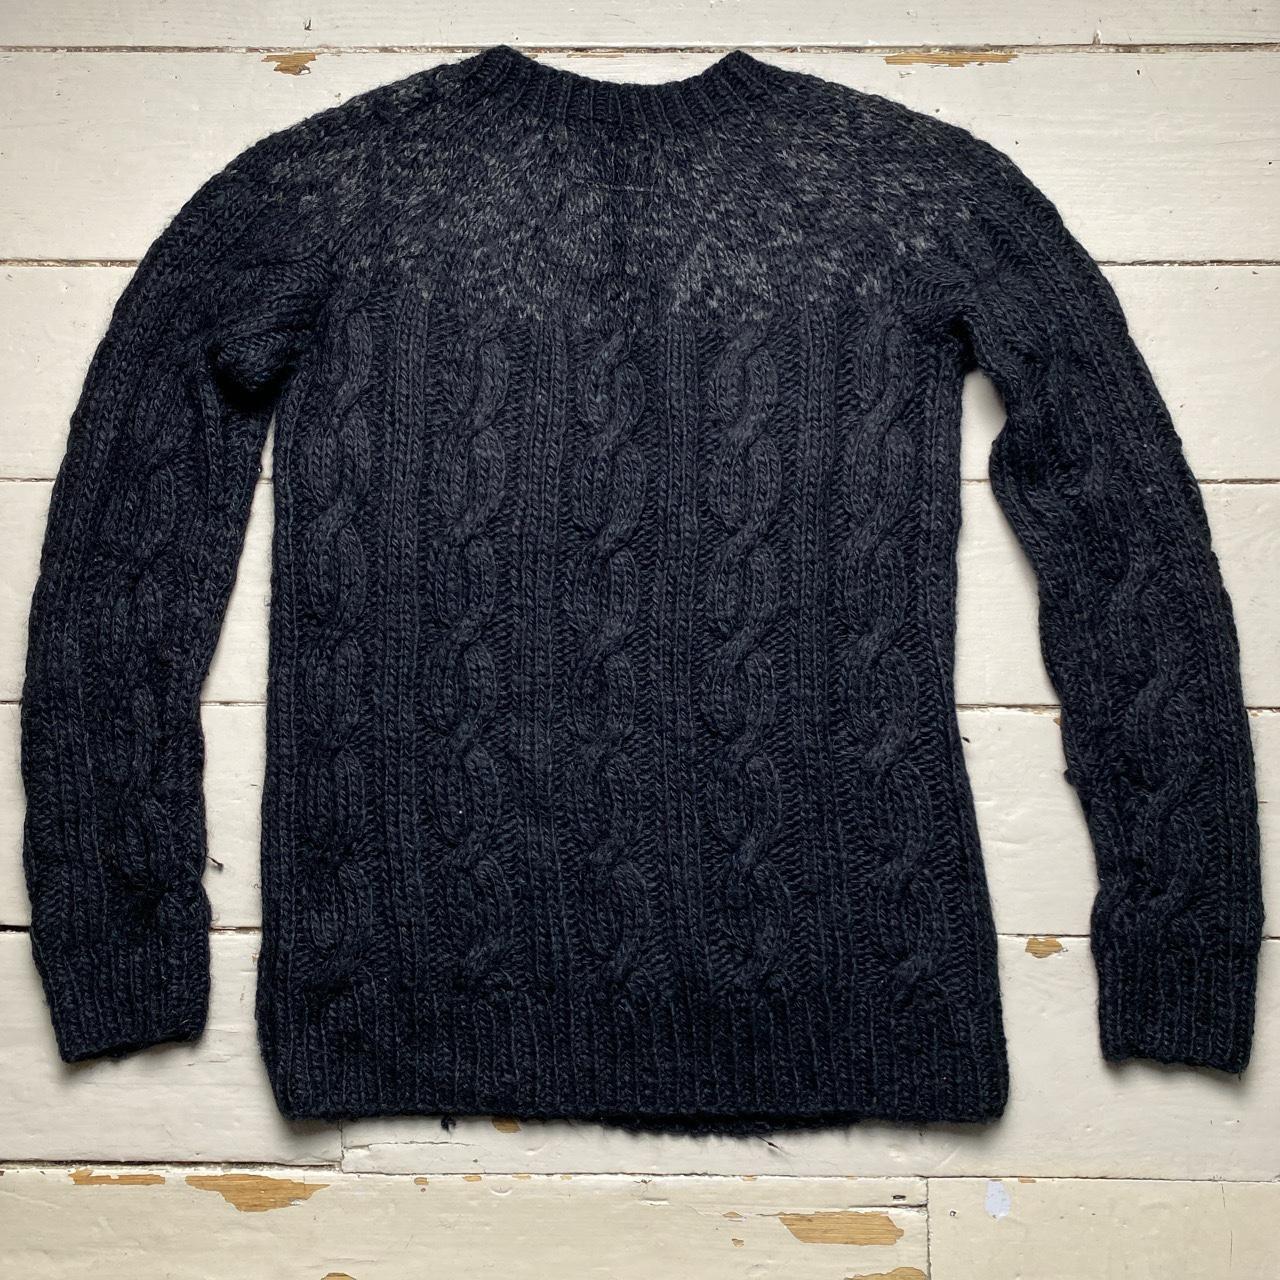 All Saints Black and Grey Thick Knitted Jumper